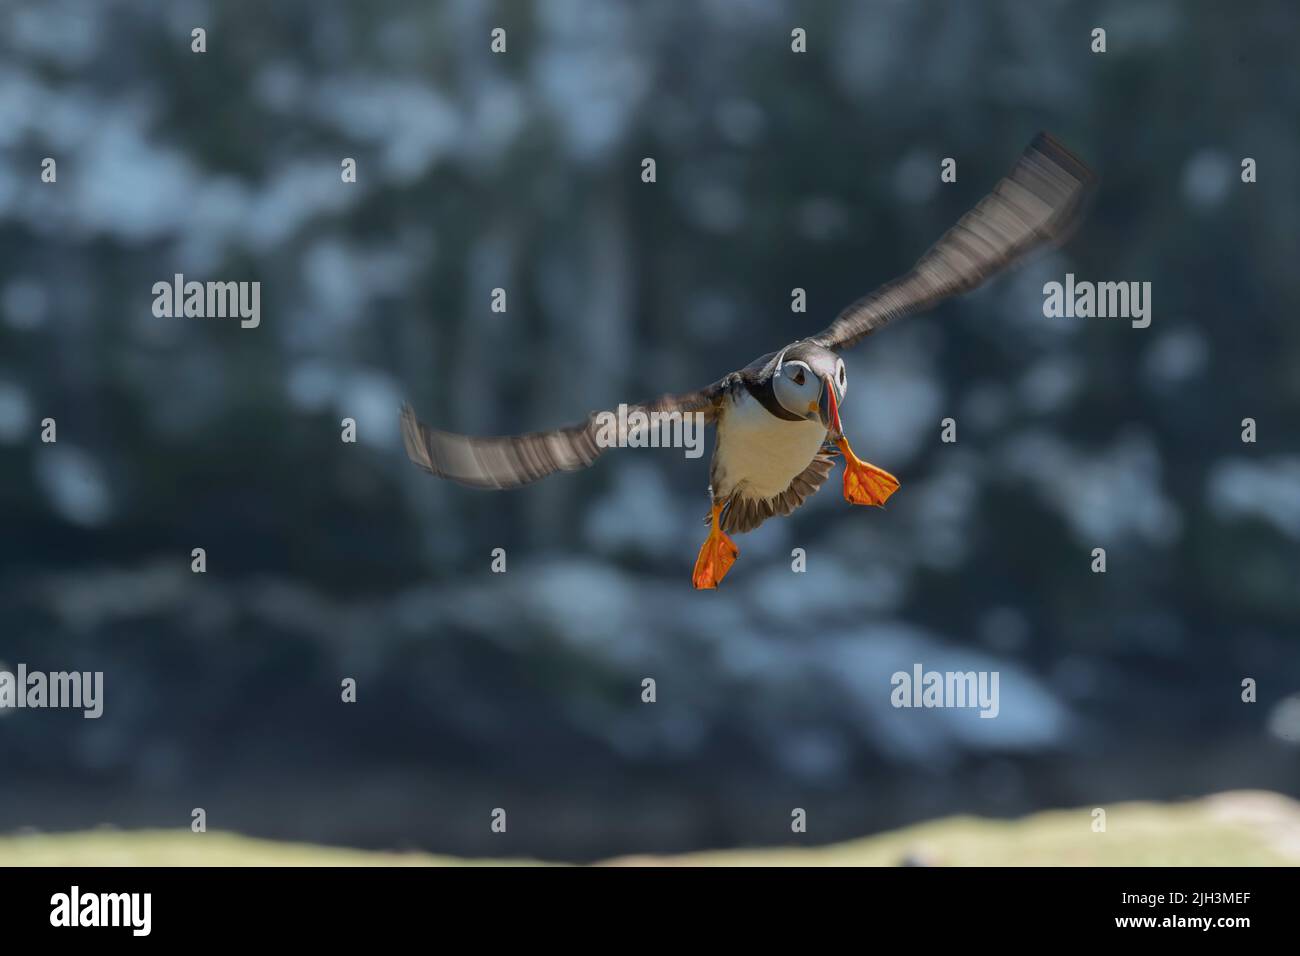 Puffin landing with very blurred wings Stock Photo